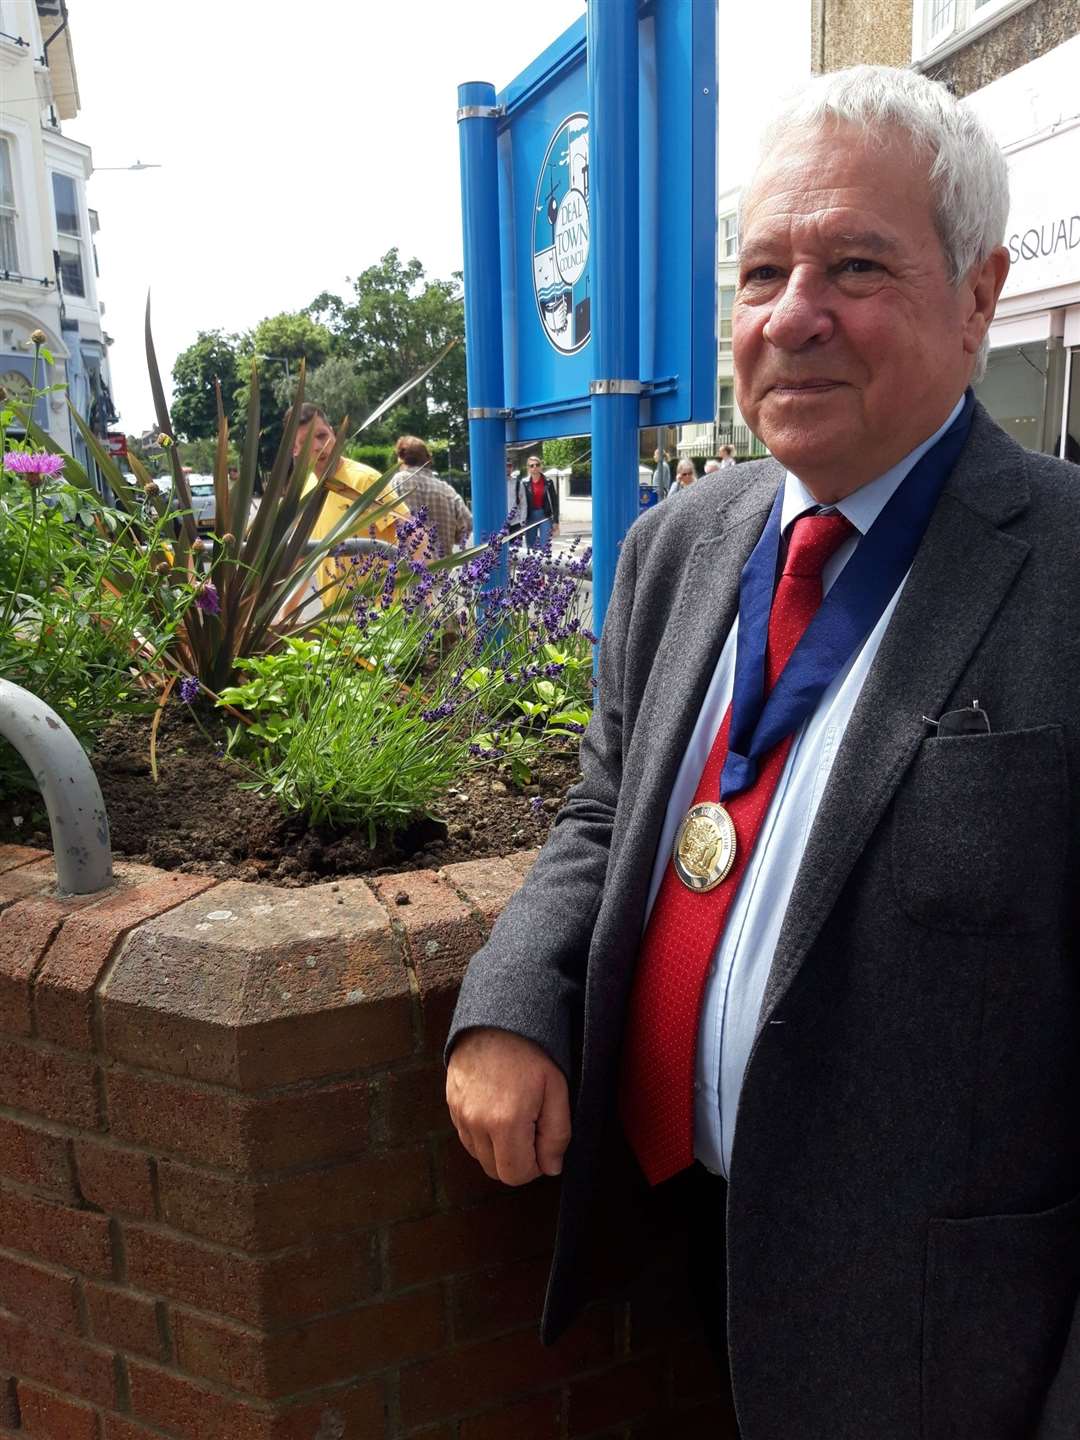 Mayor of Deal Cllr Chris Turner is impressed with the progress of Deal Town Council's sustainable planting project